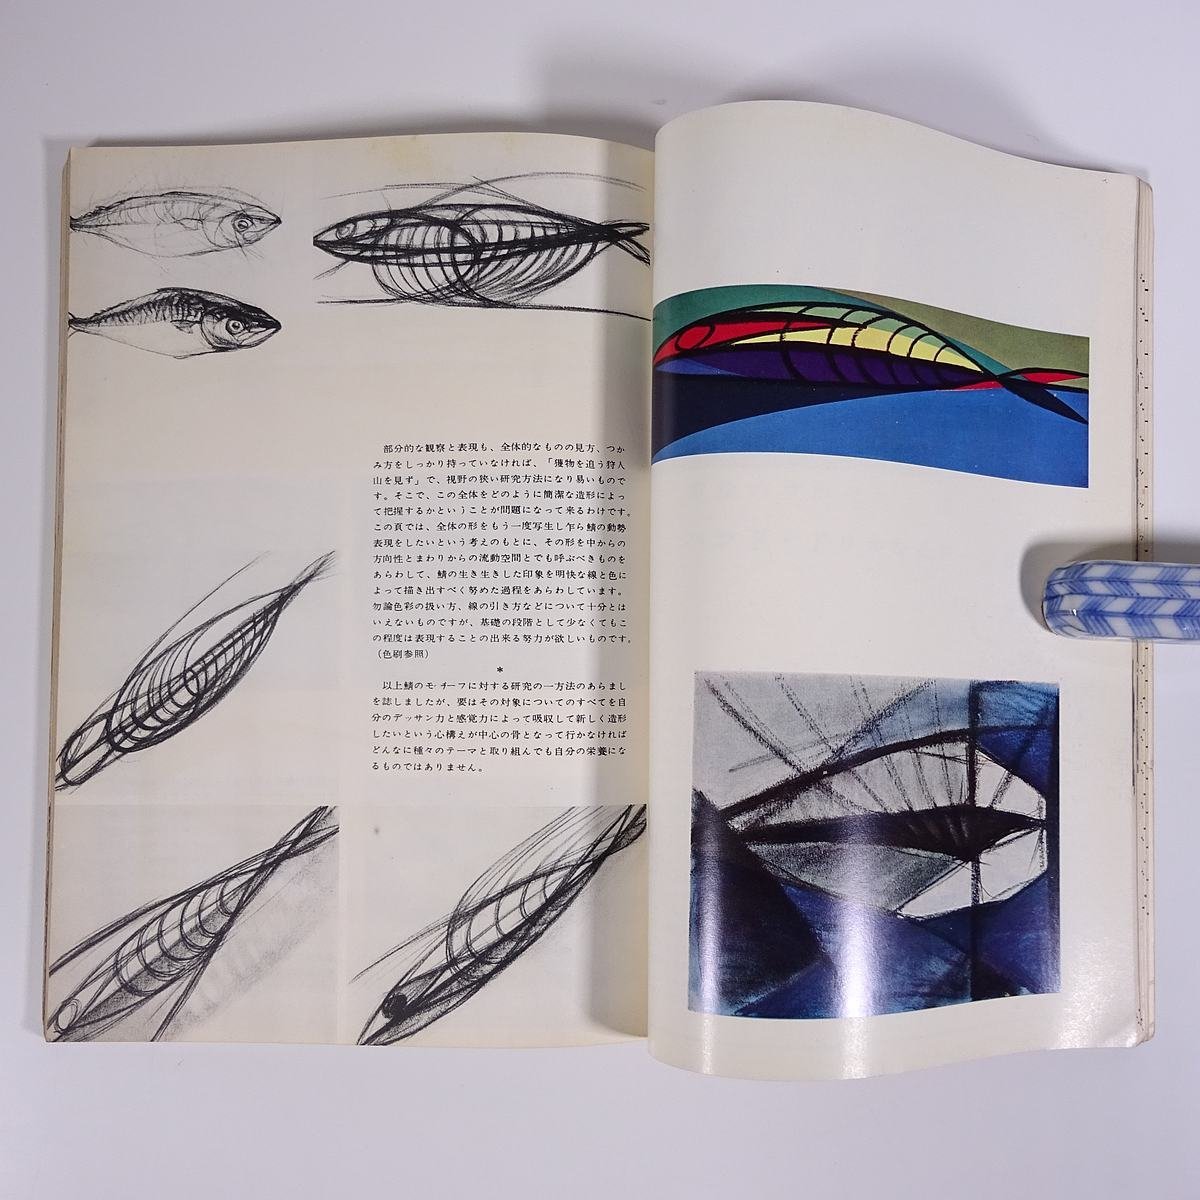  separate volume marks lieNo.70 1961/6 marks lie publish company magazine art fine art picture special collection * design. base real .Ⅰ observation *..* table reality 